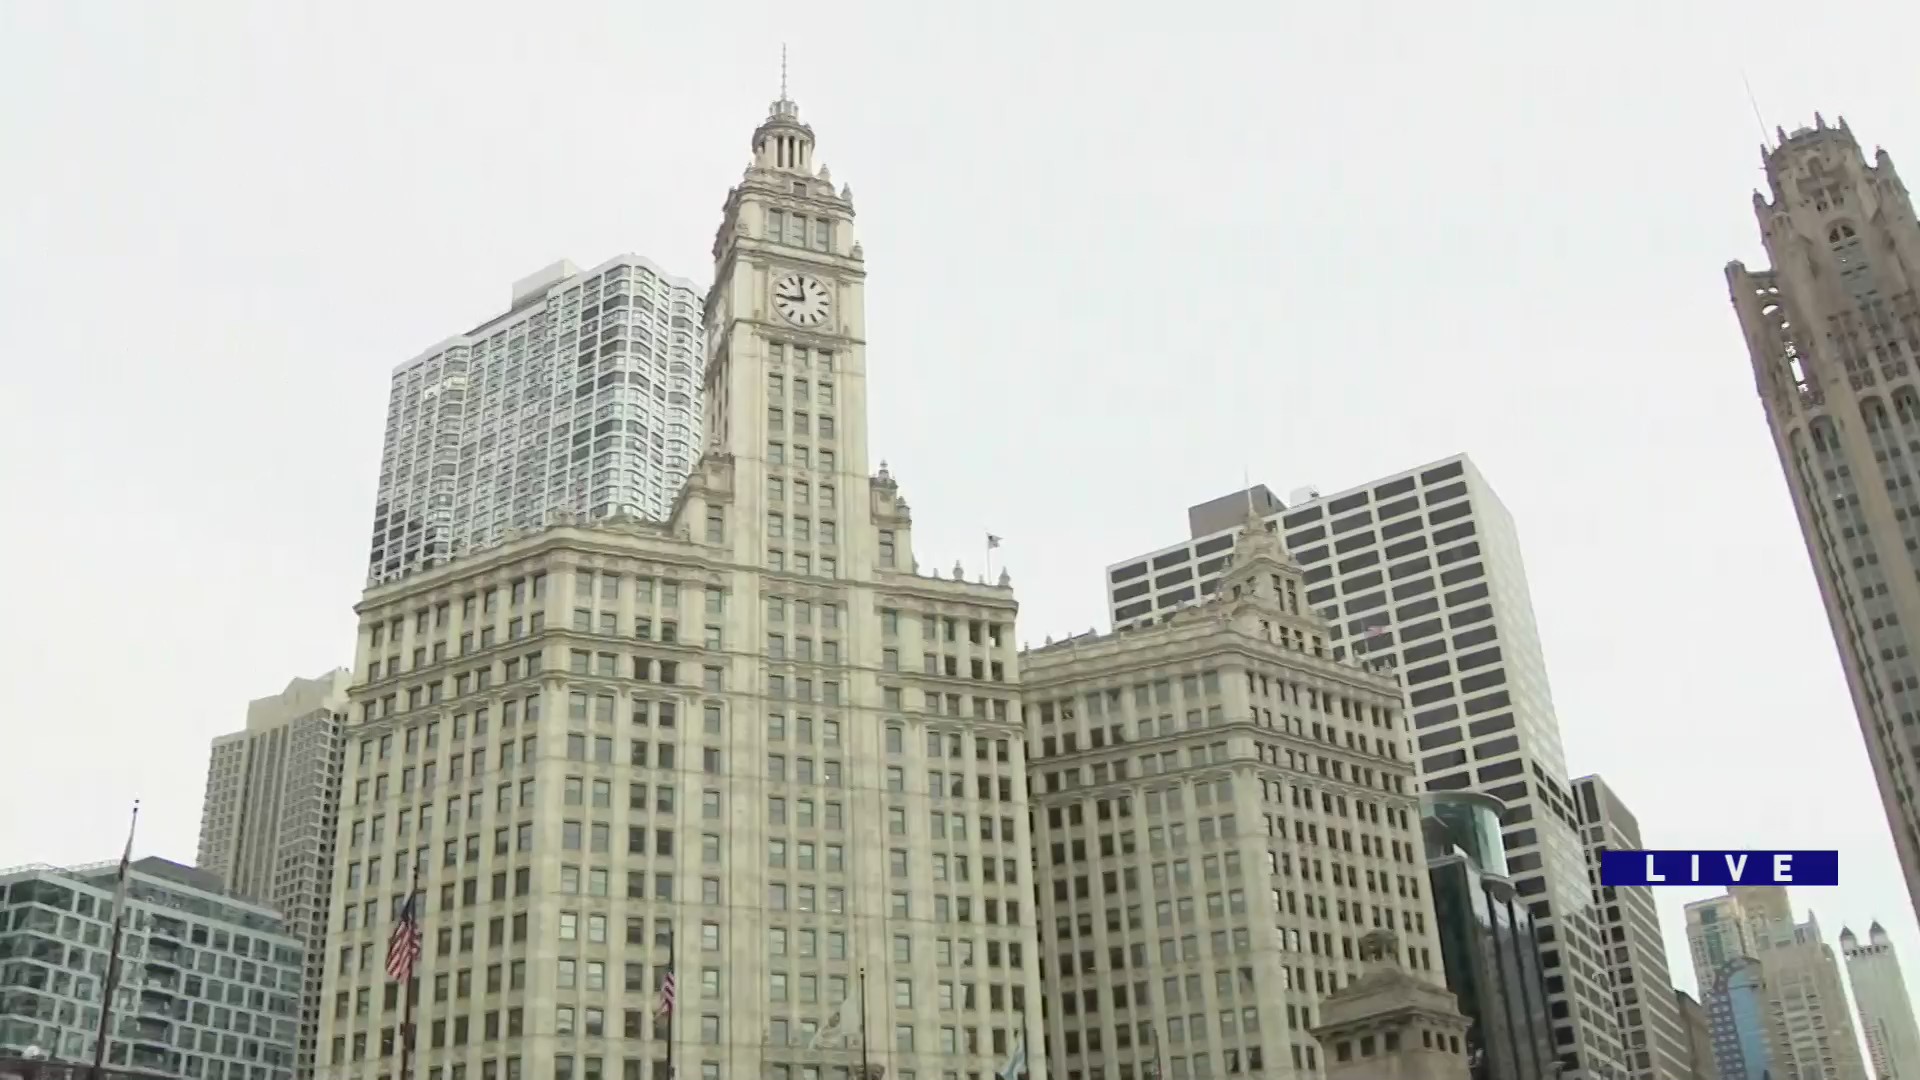 Around Town gives you a look into Chicago tourism with Choose Chicago